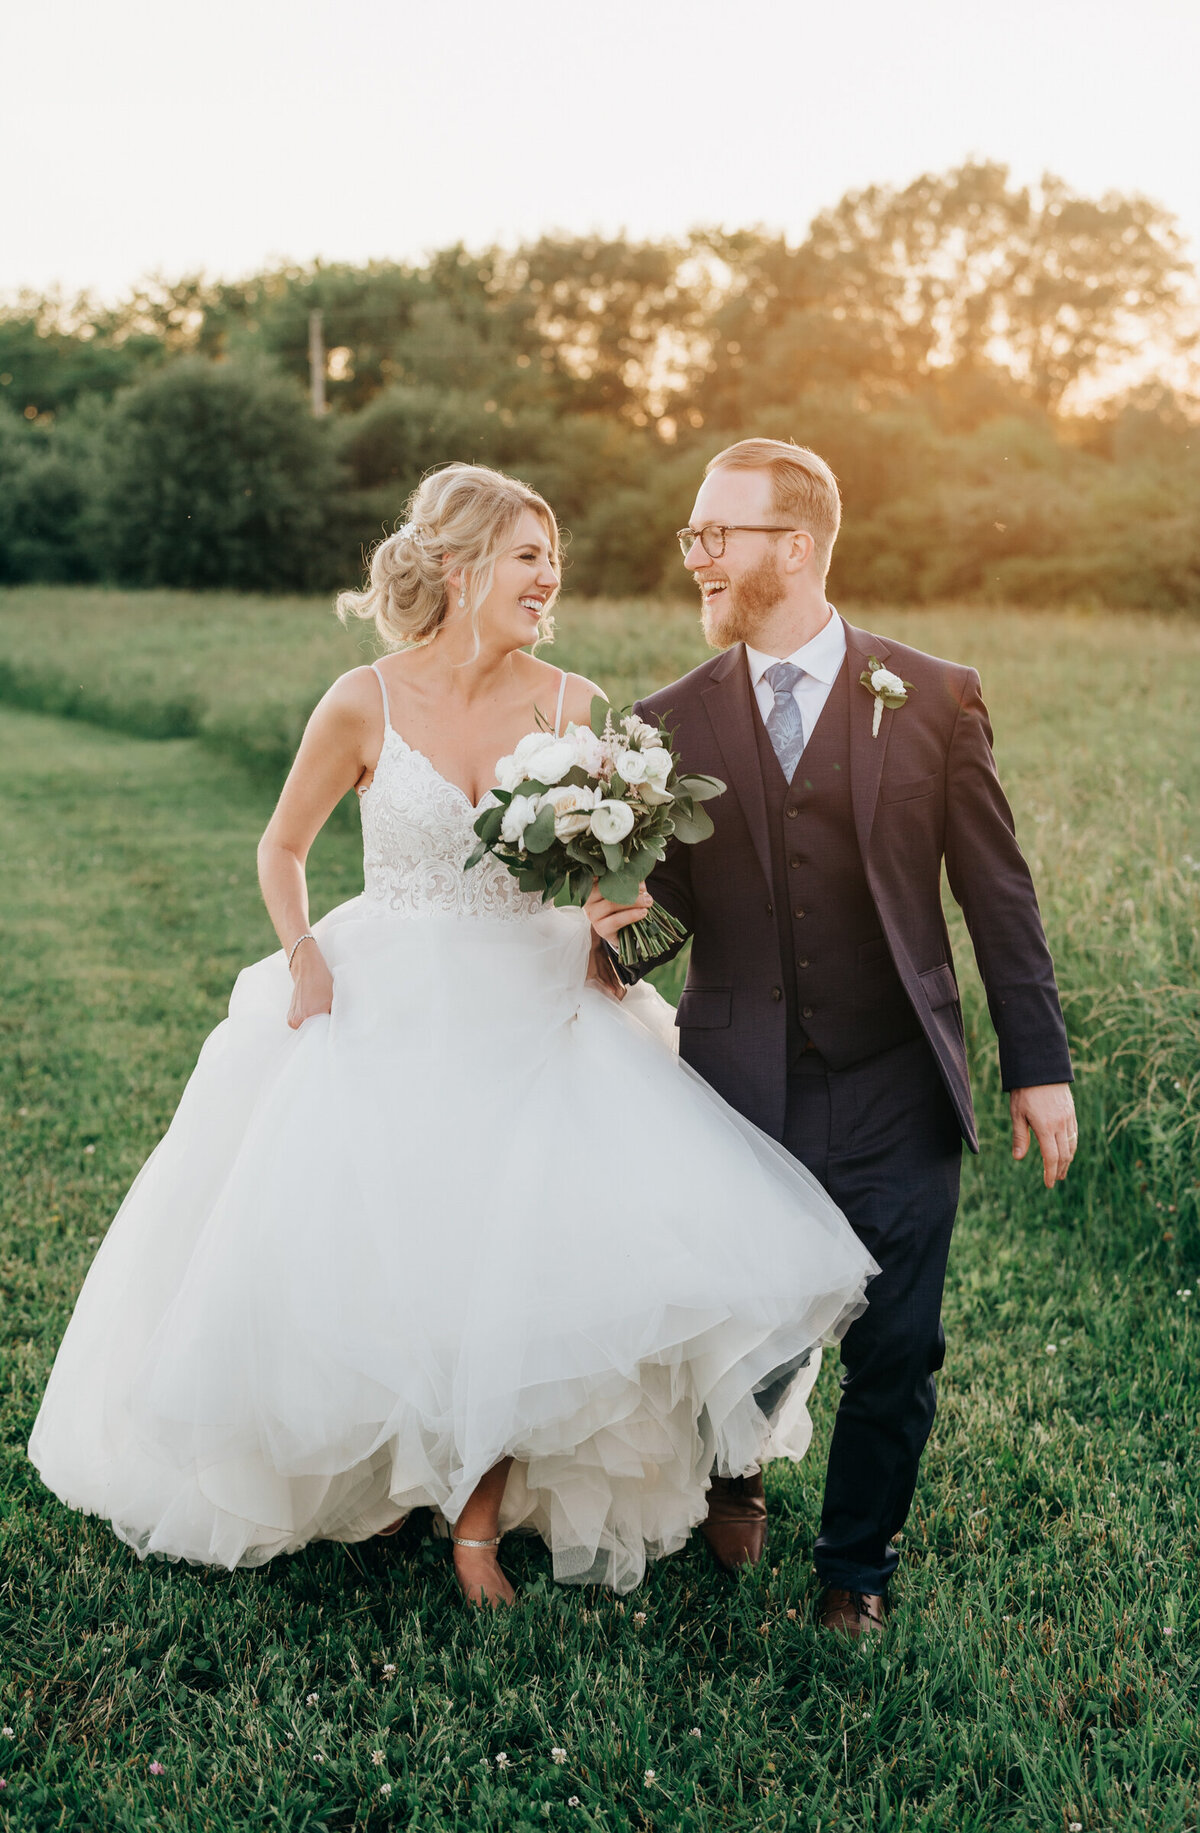 Candid portraits of bride and groom enjoying the sunset at their Willow Creek Barn wedding by Nova Markina Photography